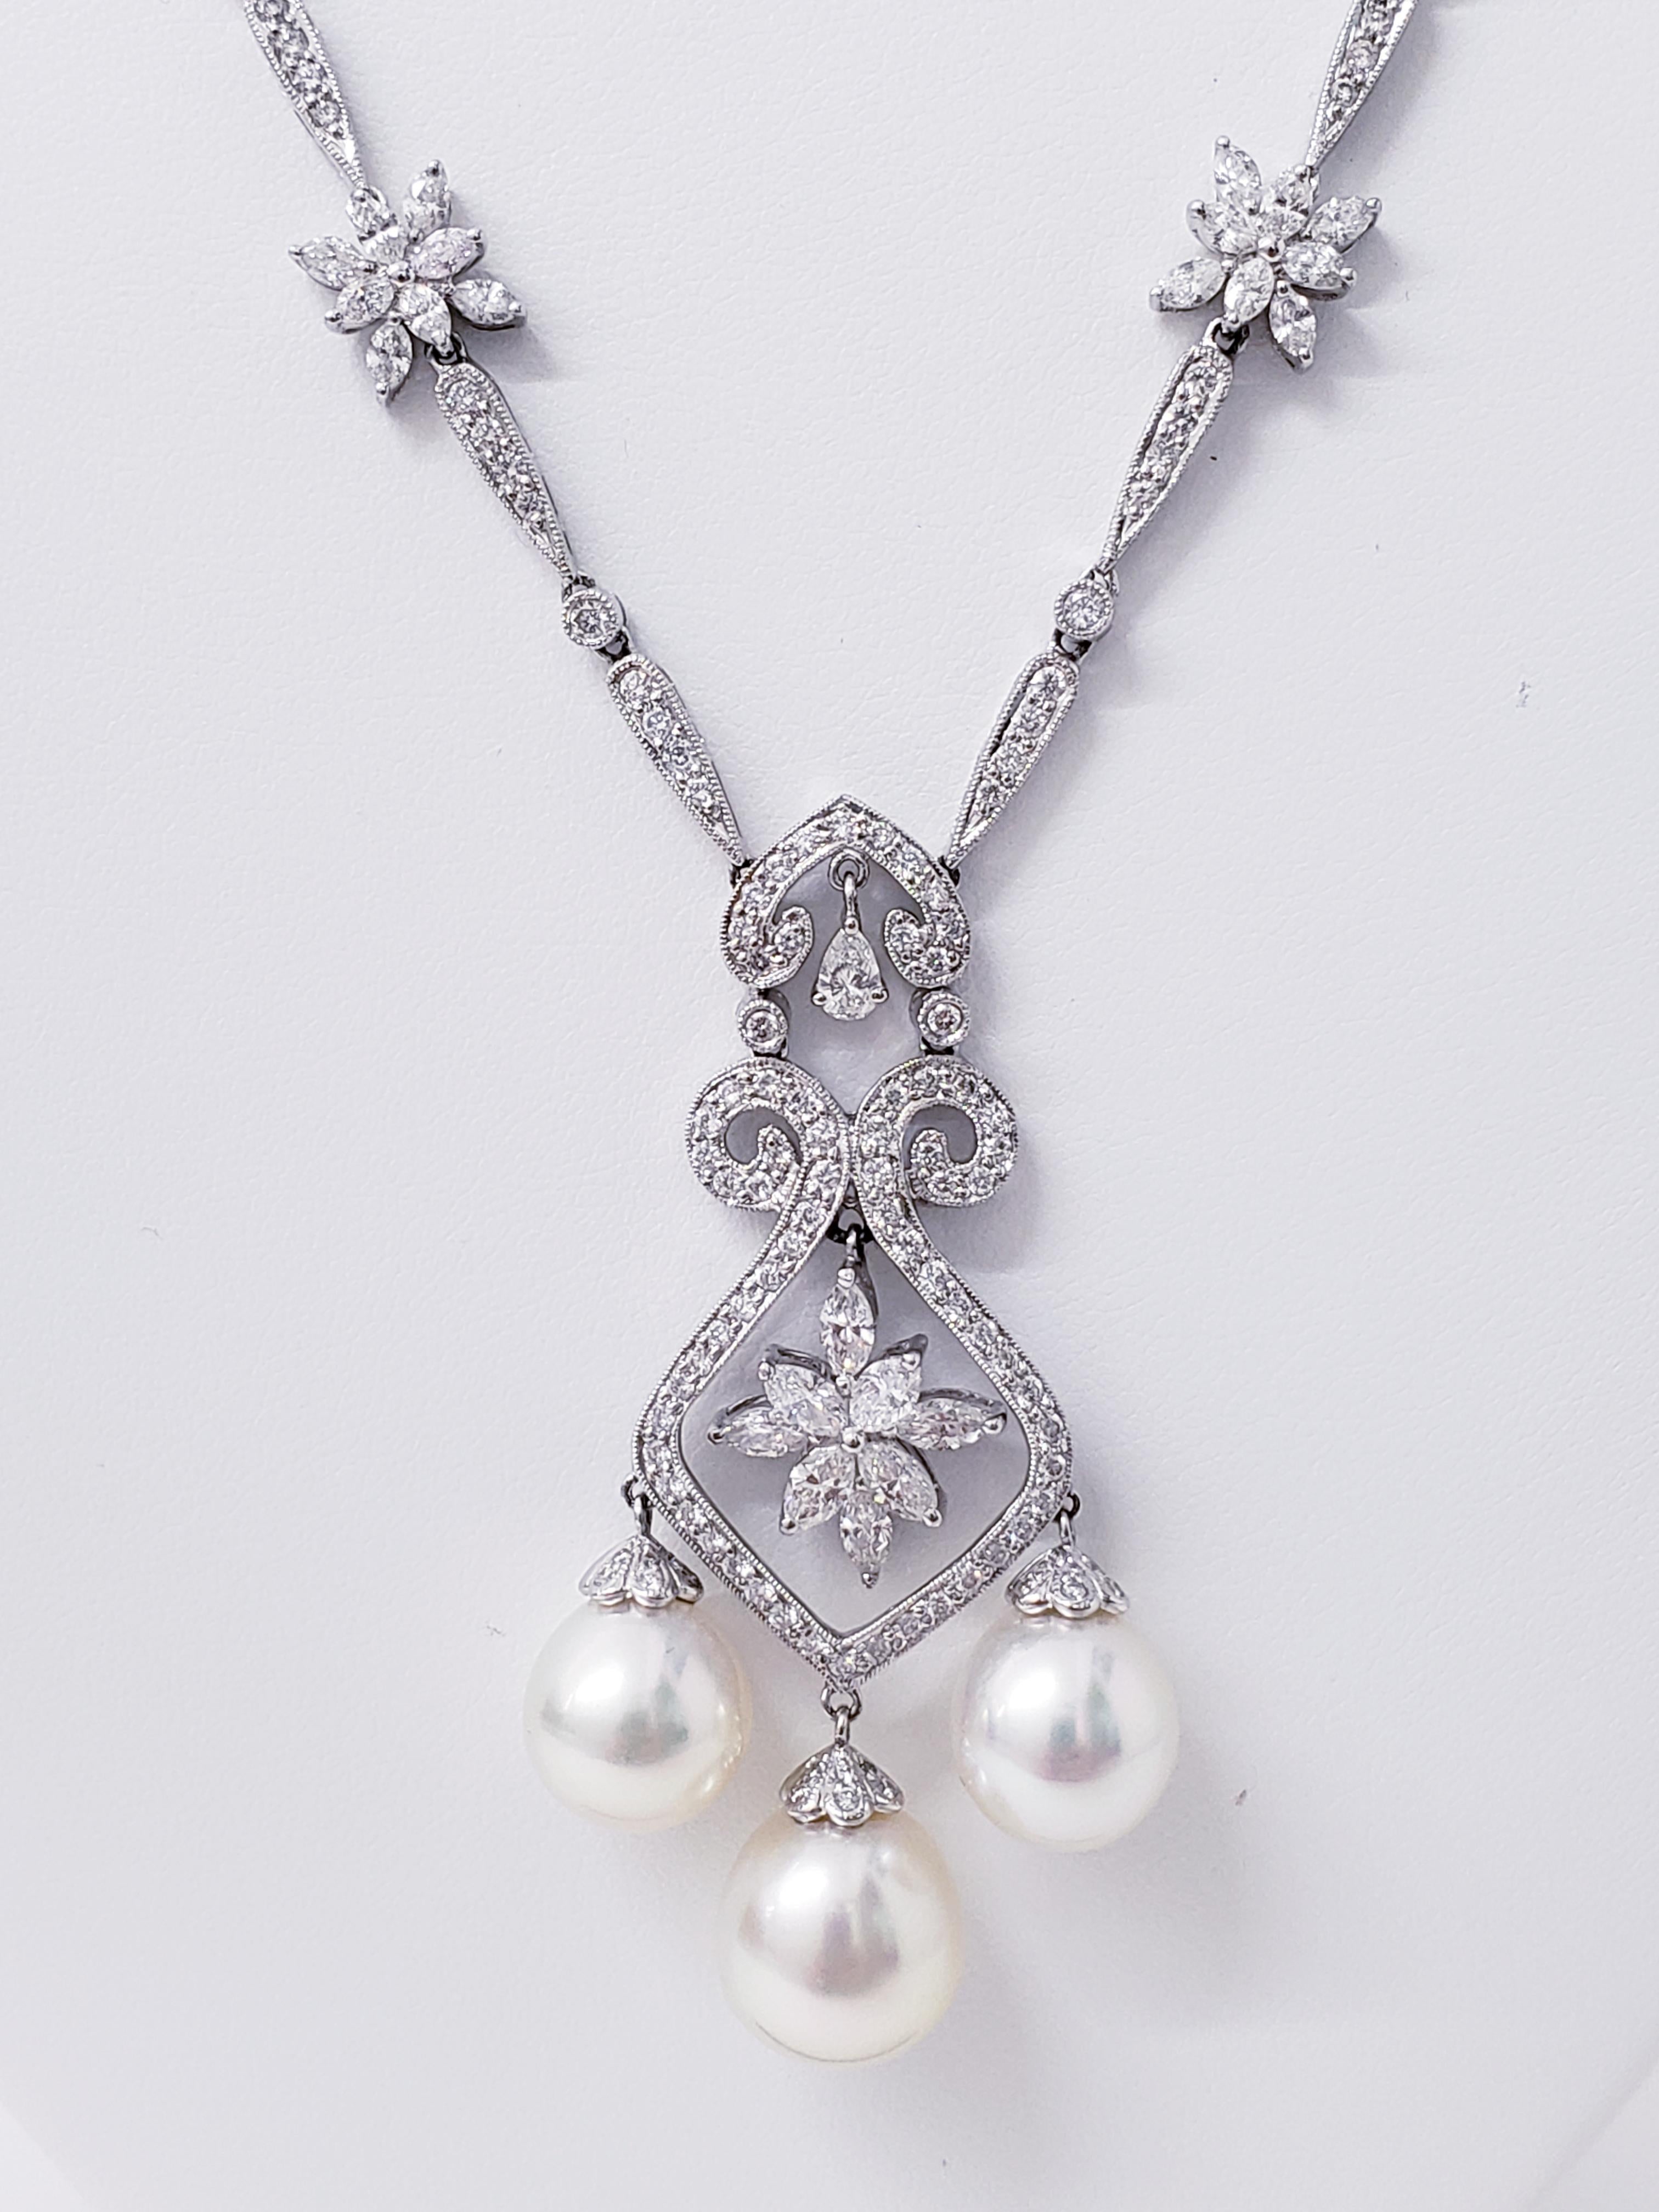 Art Deco 11mm Pearls & 7 Carats Diamonds Necklace. The center pearl is approx 11.35mm and the side pearls are 10.40mm each. The diamonds consist of marquise, pear shape and round diamonds total carat weight 7 carats.  This is a true Luxurious Art